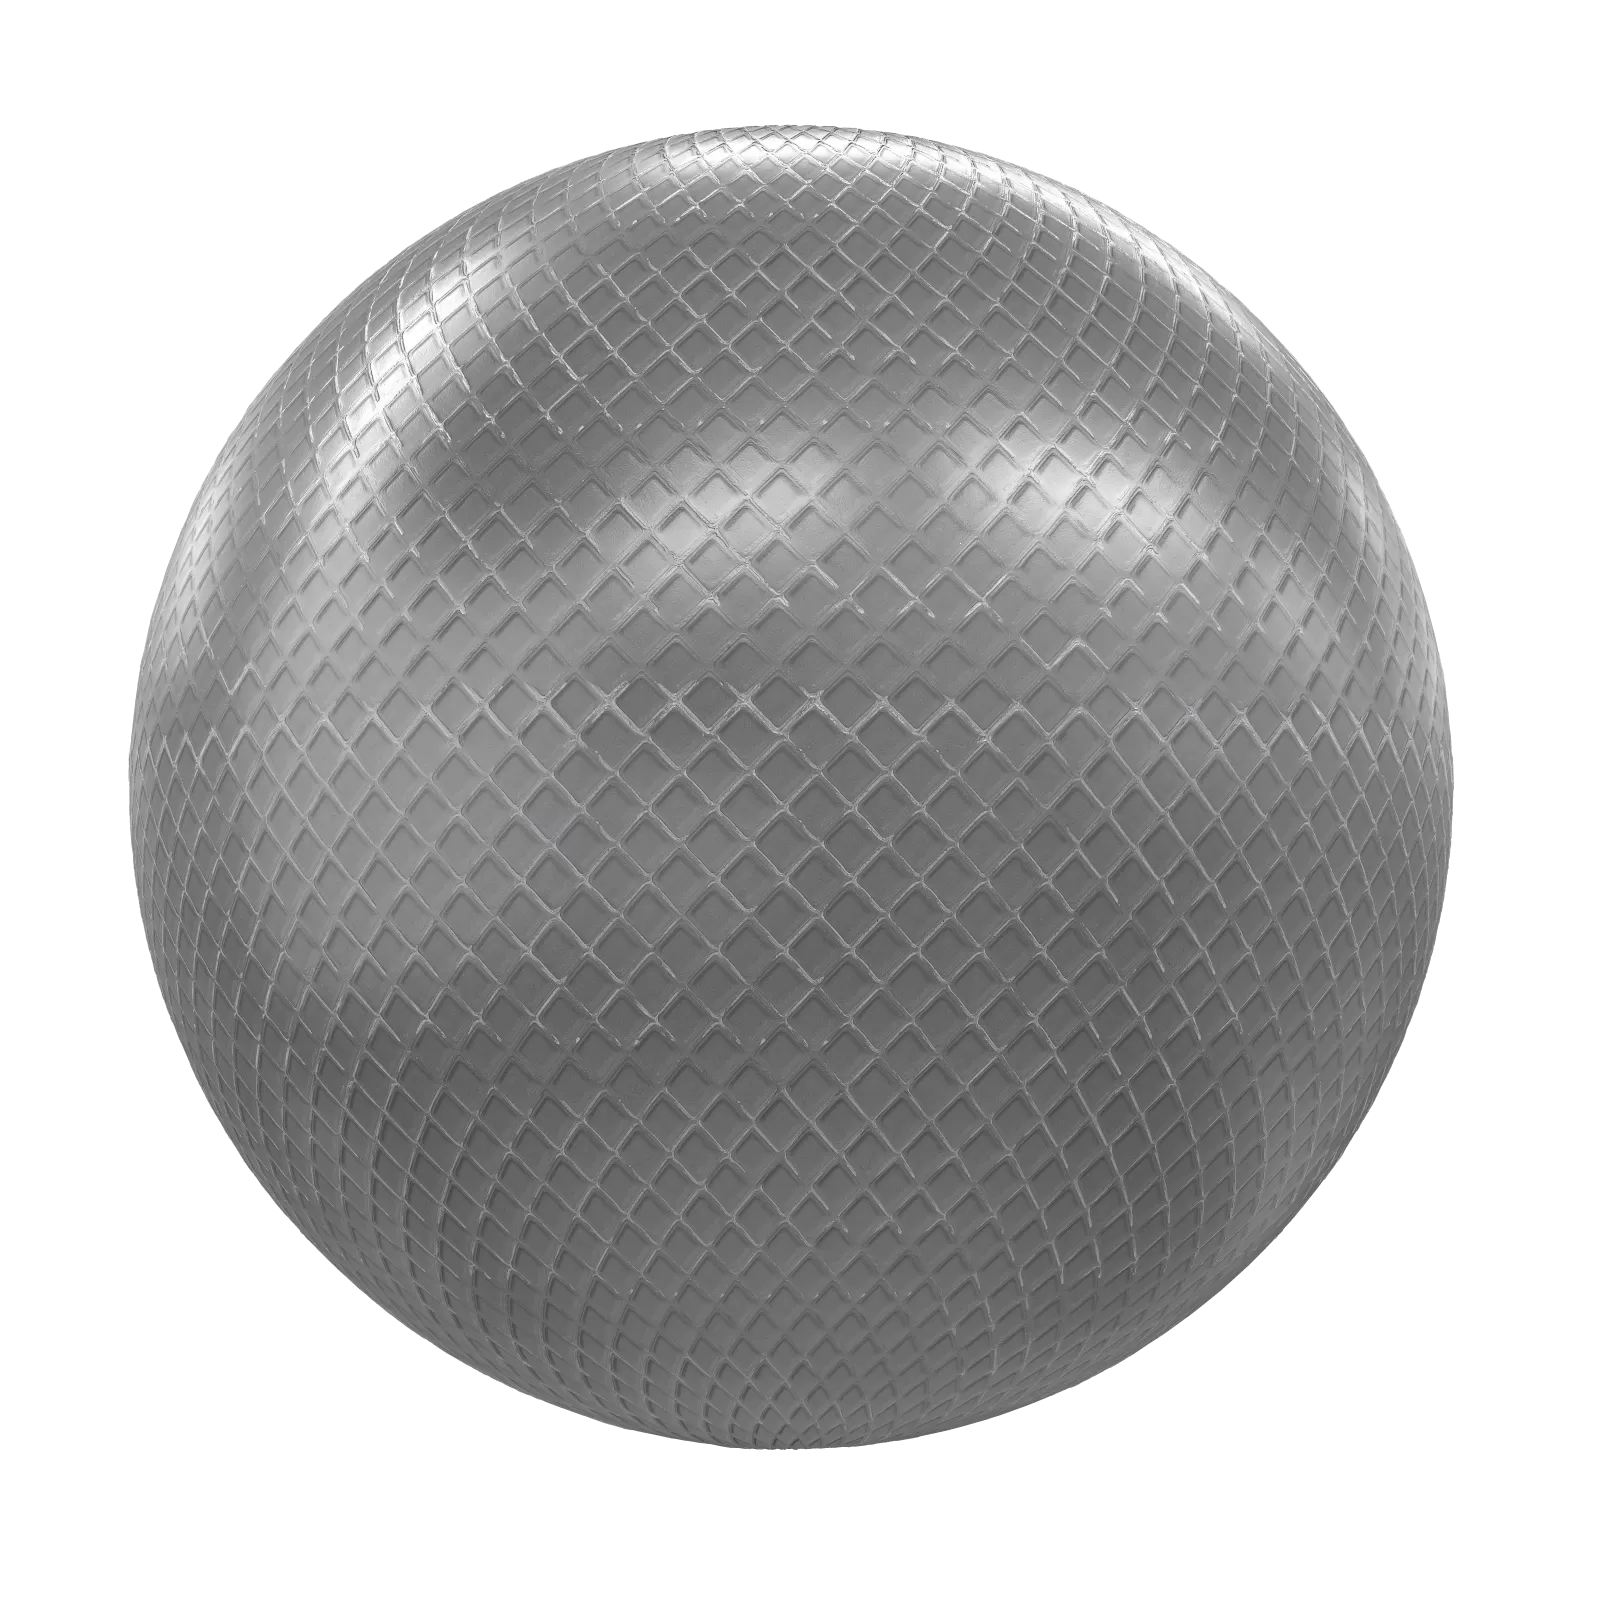 PBR CGAXIS TEXTURES – METALS – Patterned Metal 04